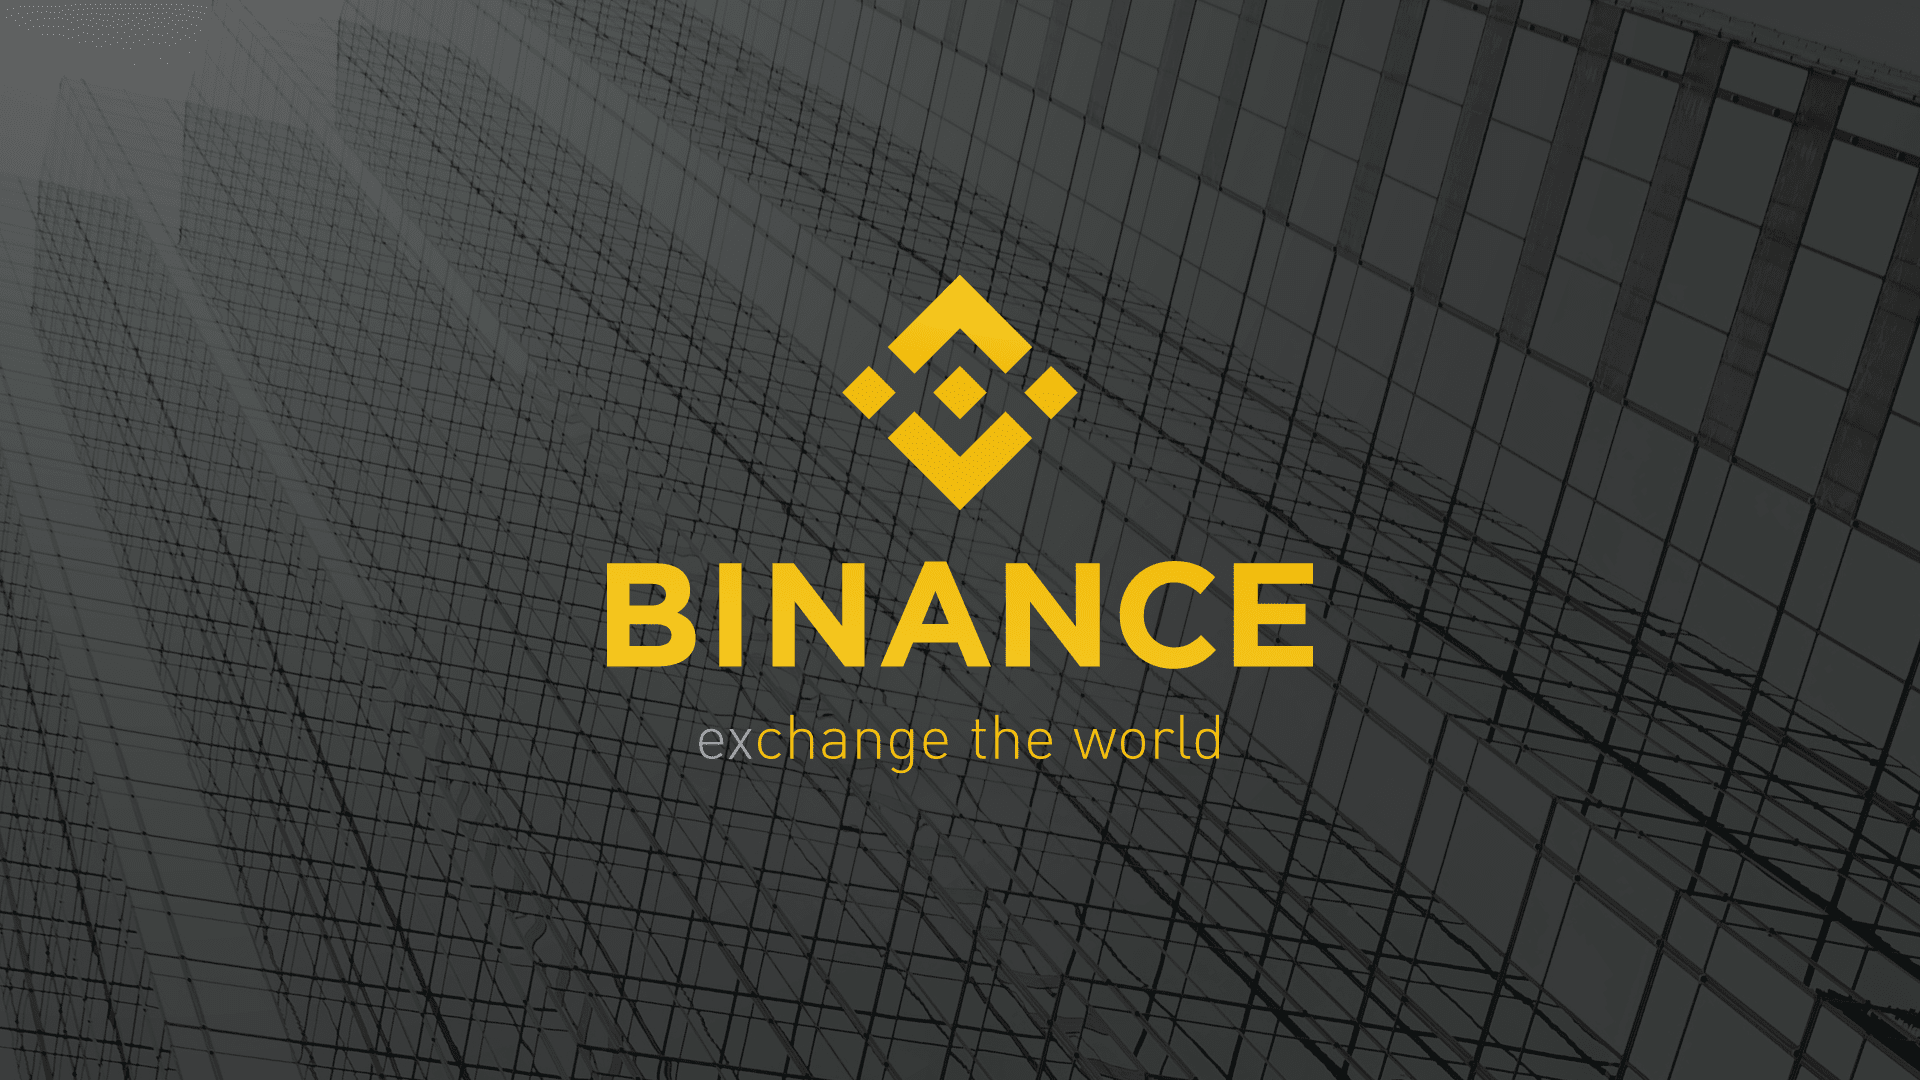 Get Your Official Binance Wallpaper And Image Here